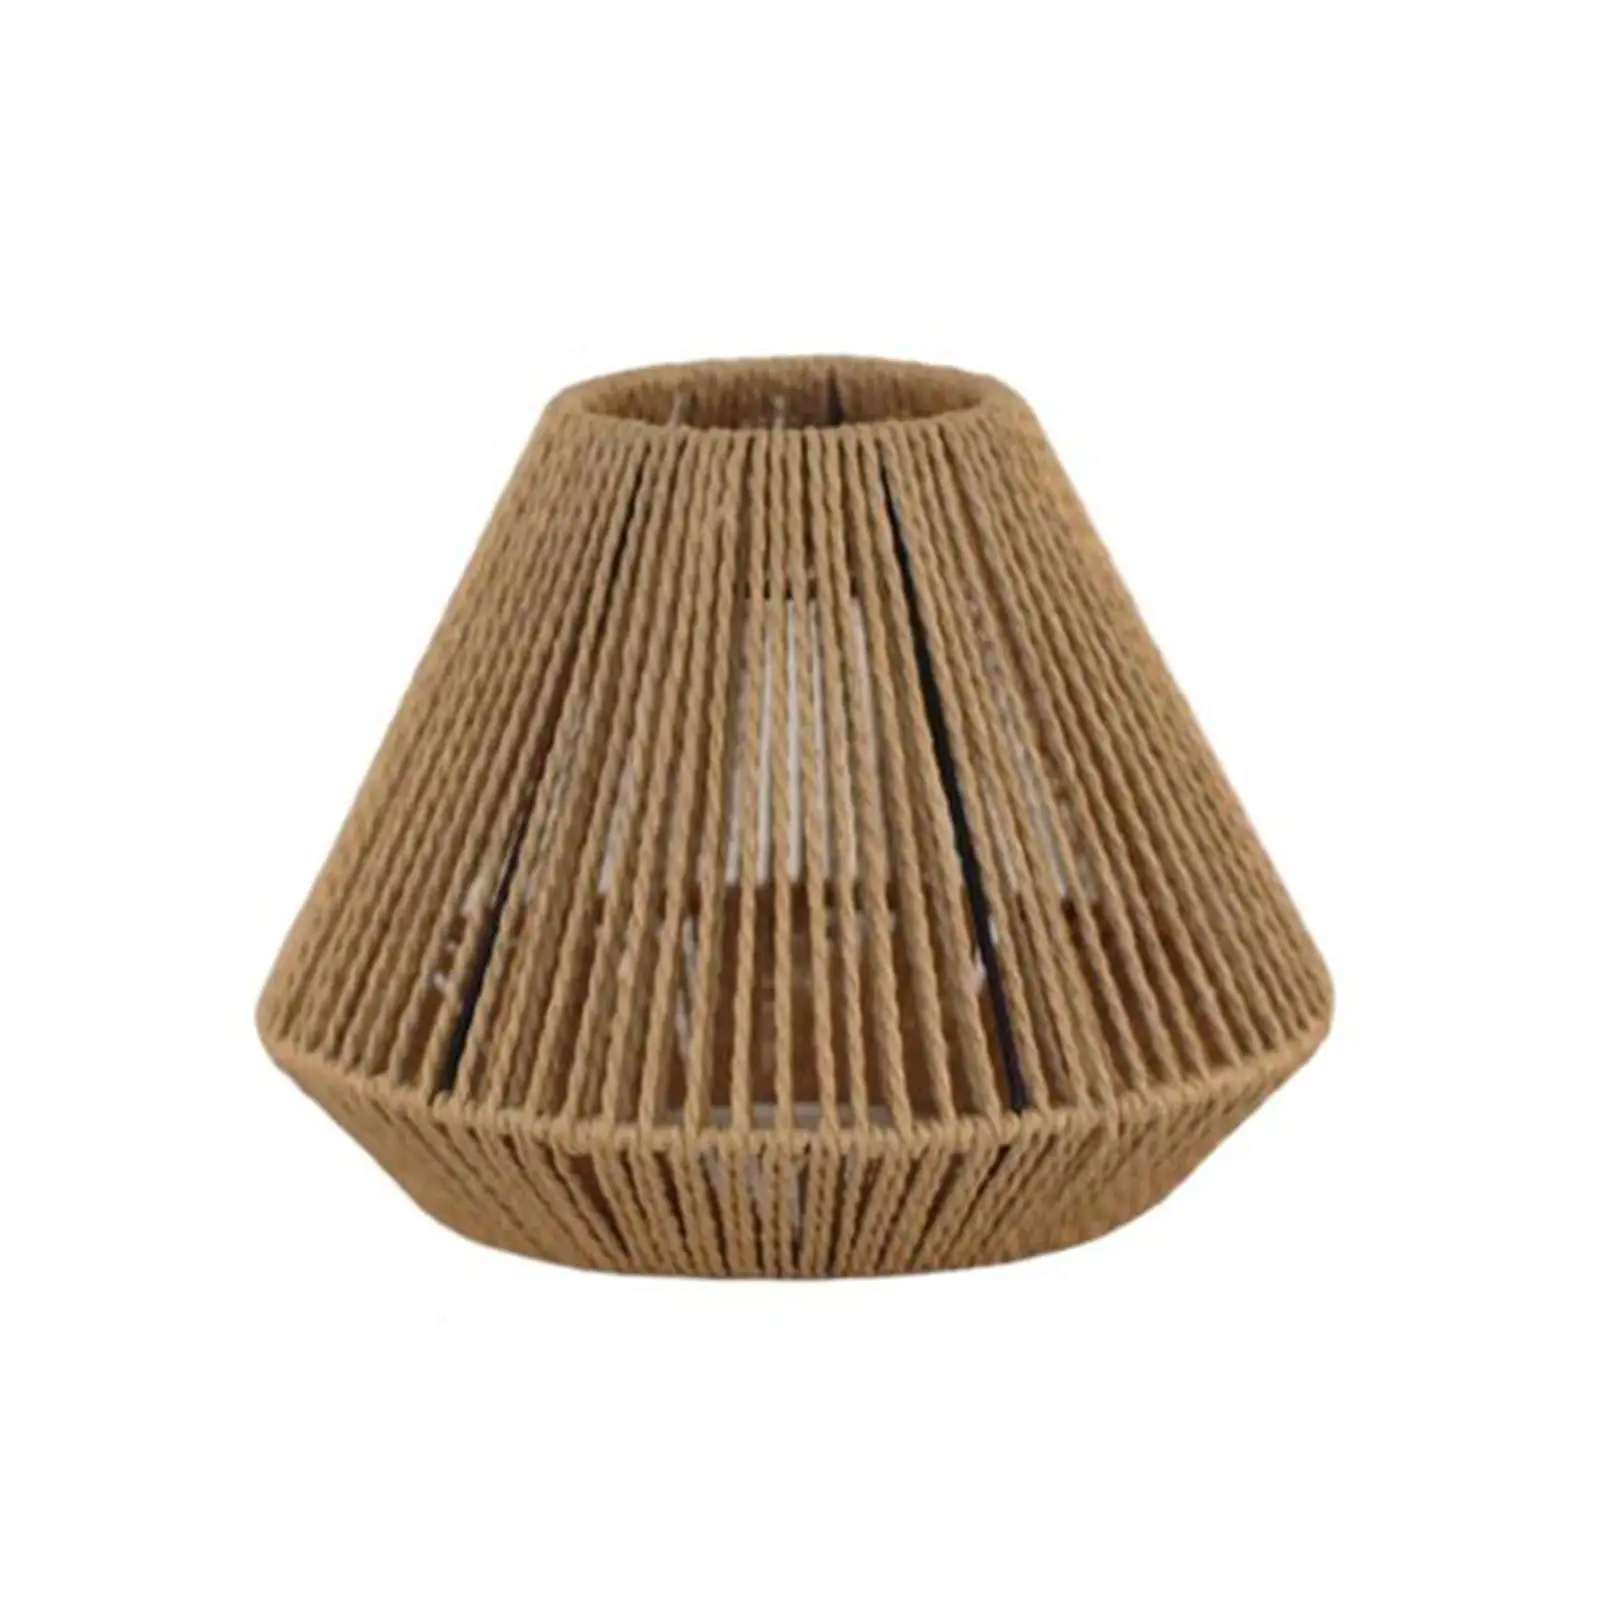 Weave Paper Rope Pendant Light Shade Cover Chandelier Cover for Home Hallway